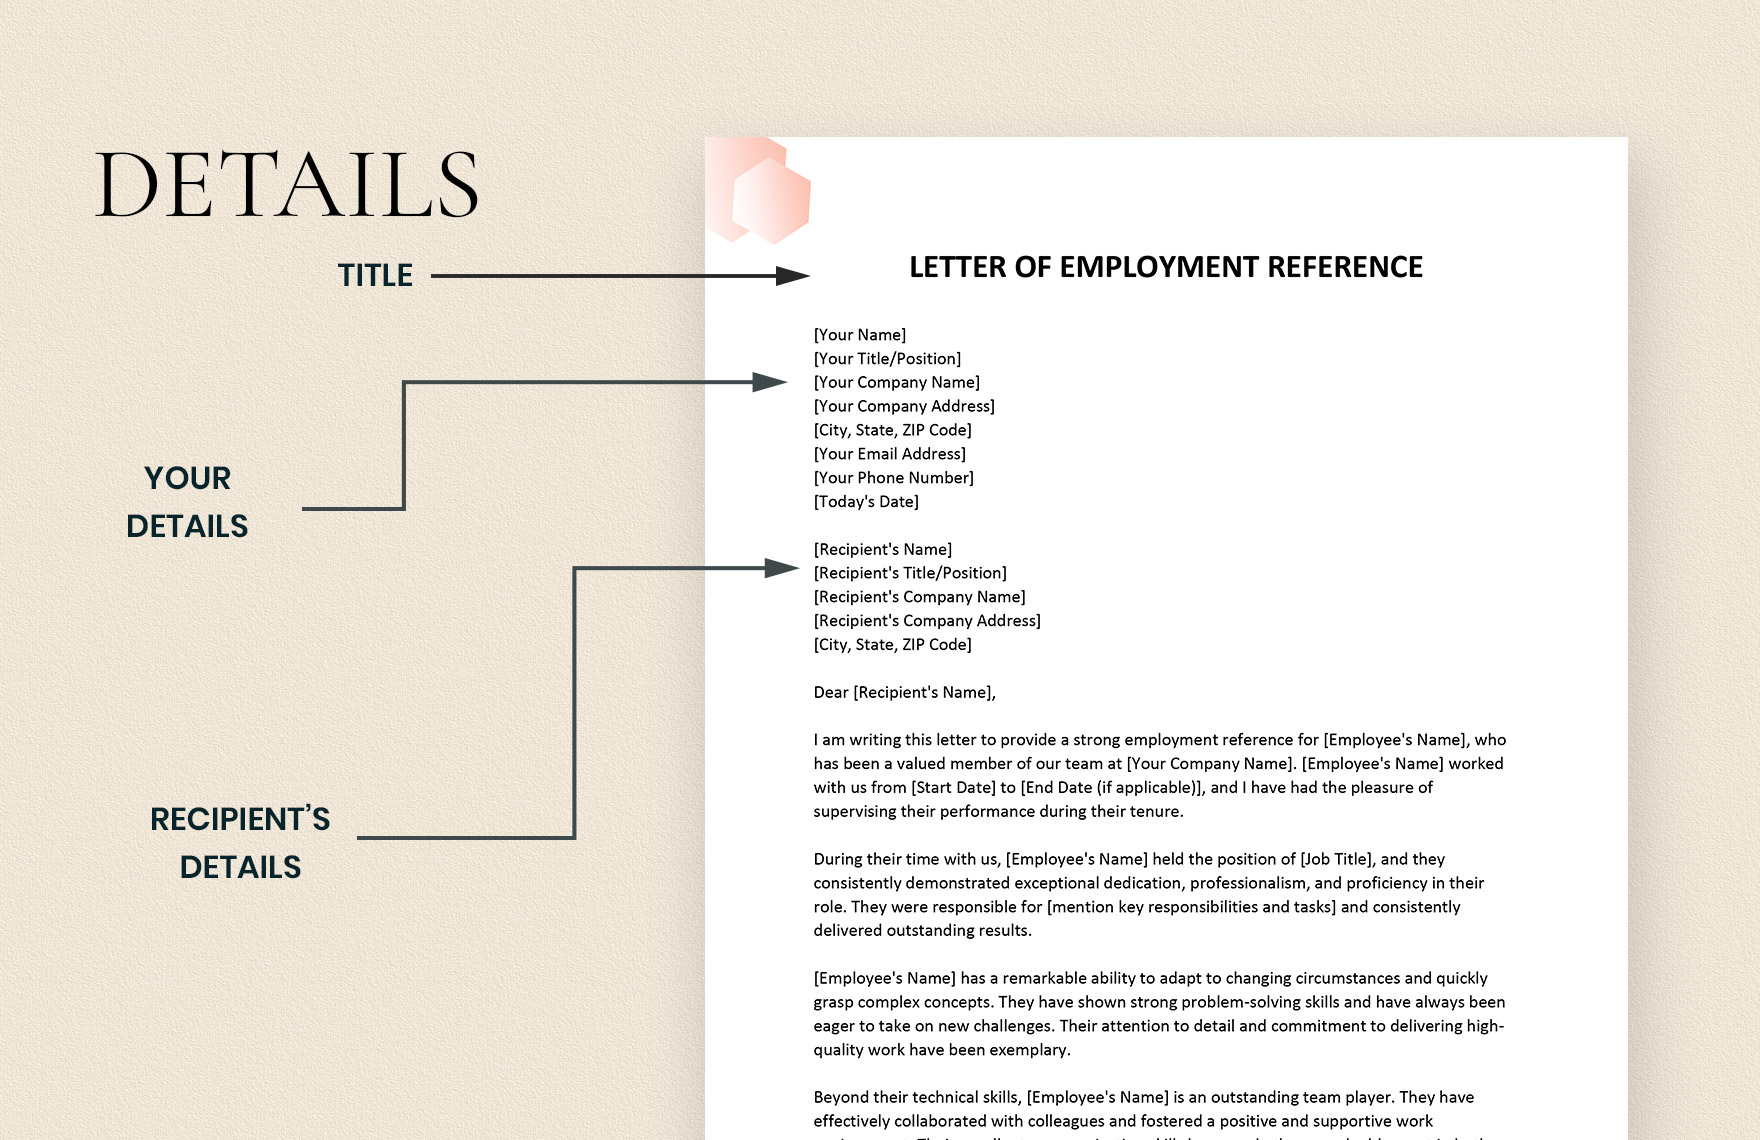 Letter of Employment Reference